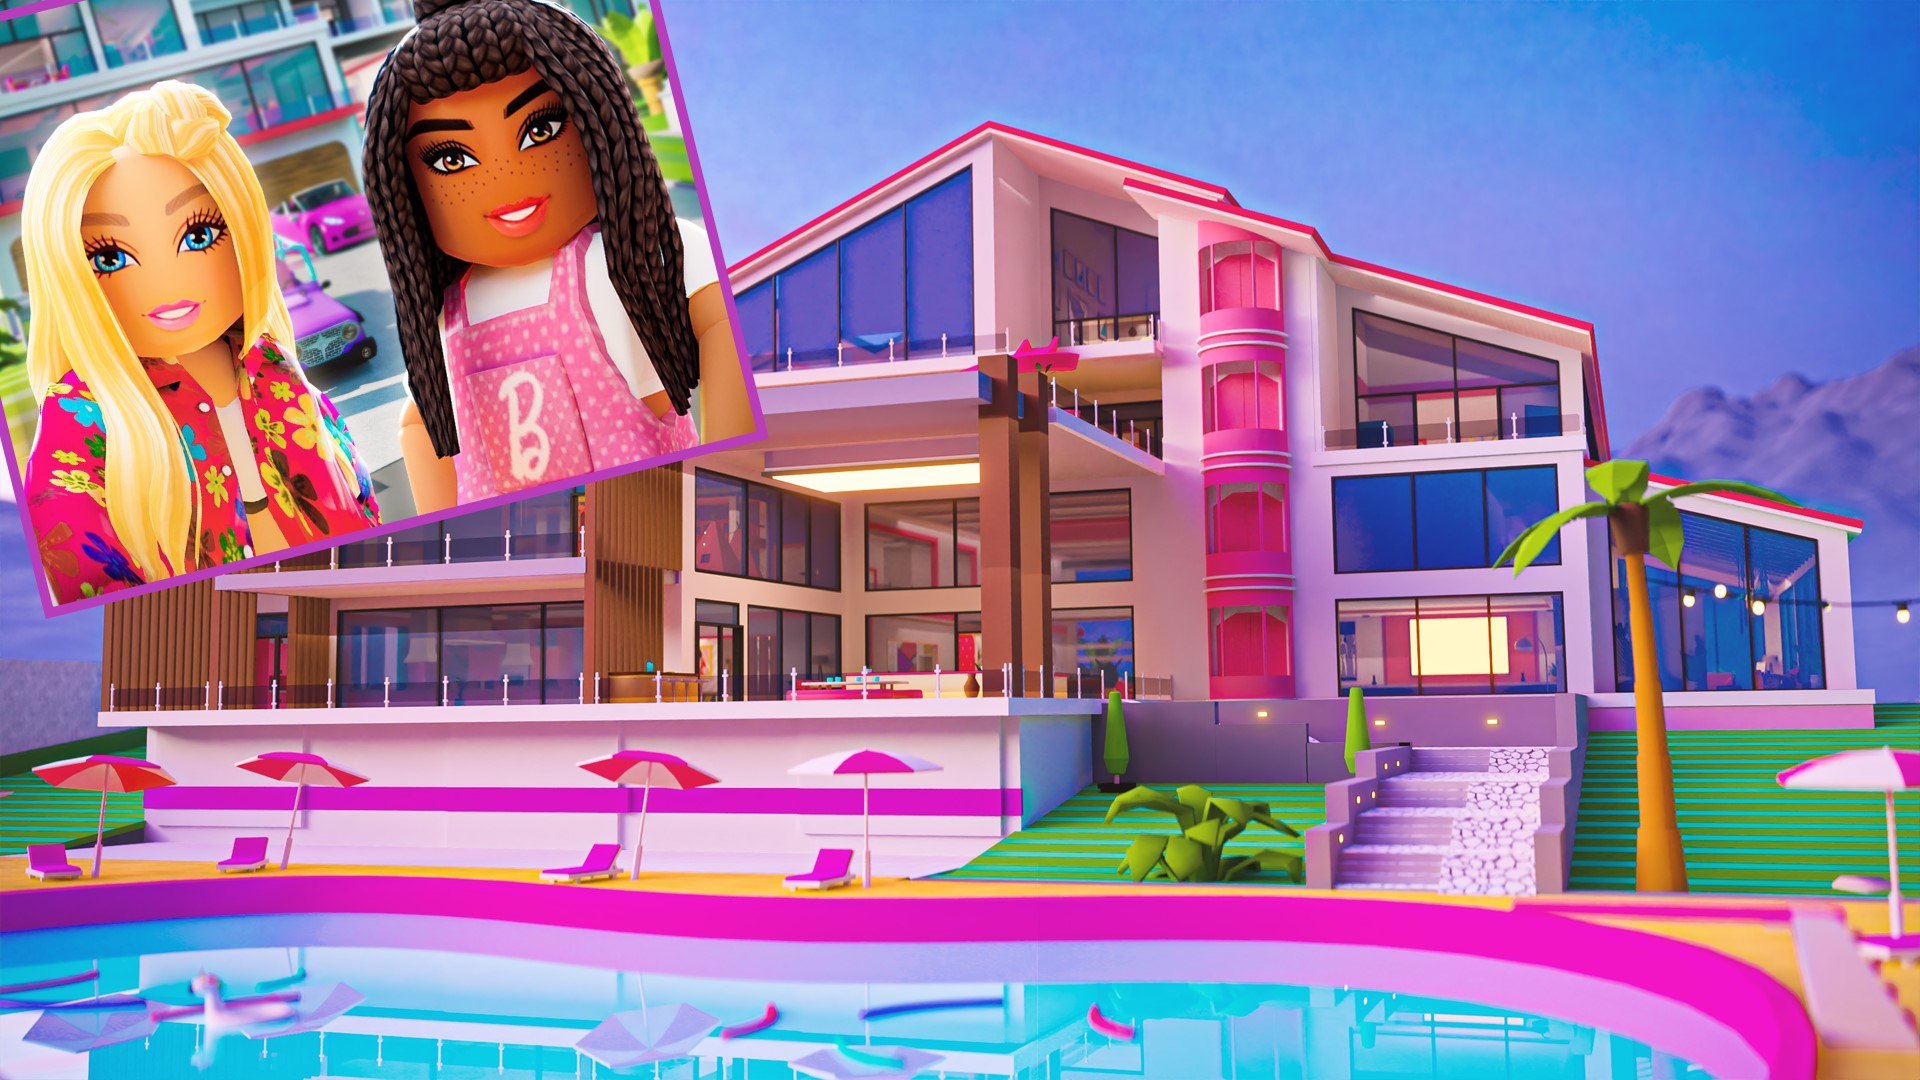 An image of a Barbie Dreamhouse in the background, with a picture of two Barbie-inspired Roblox characters superimposed in the top left corner of the image